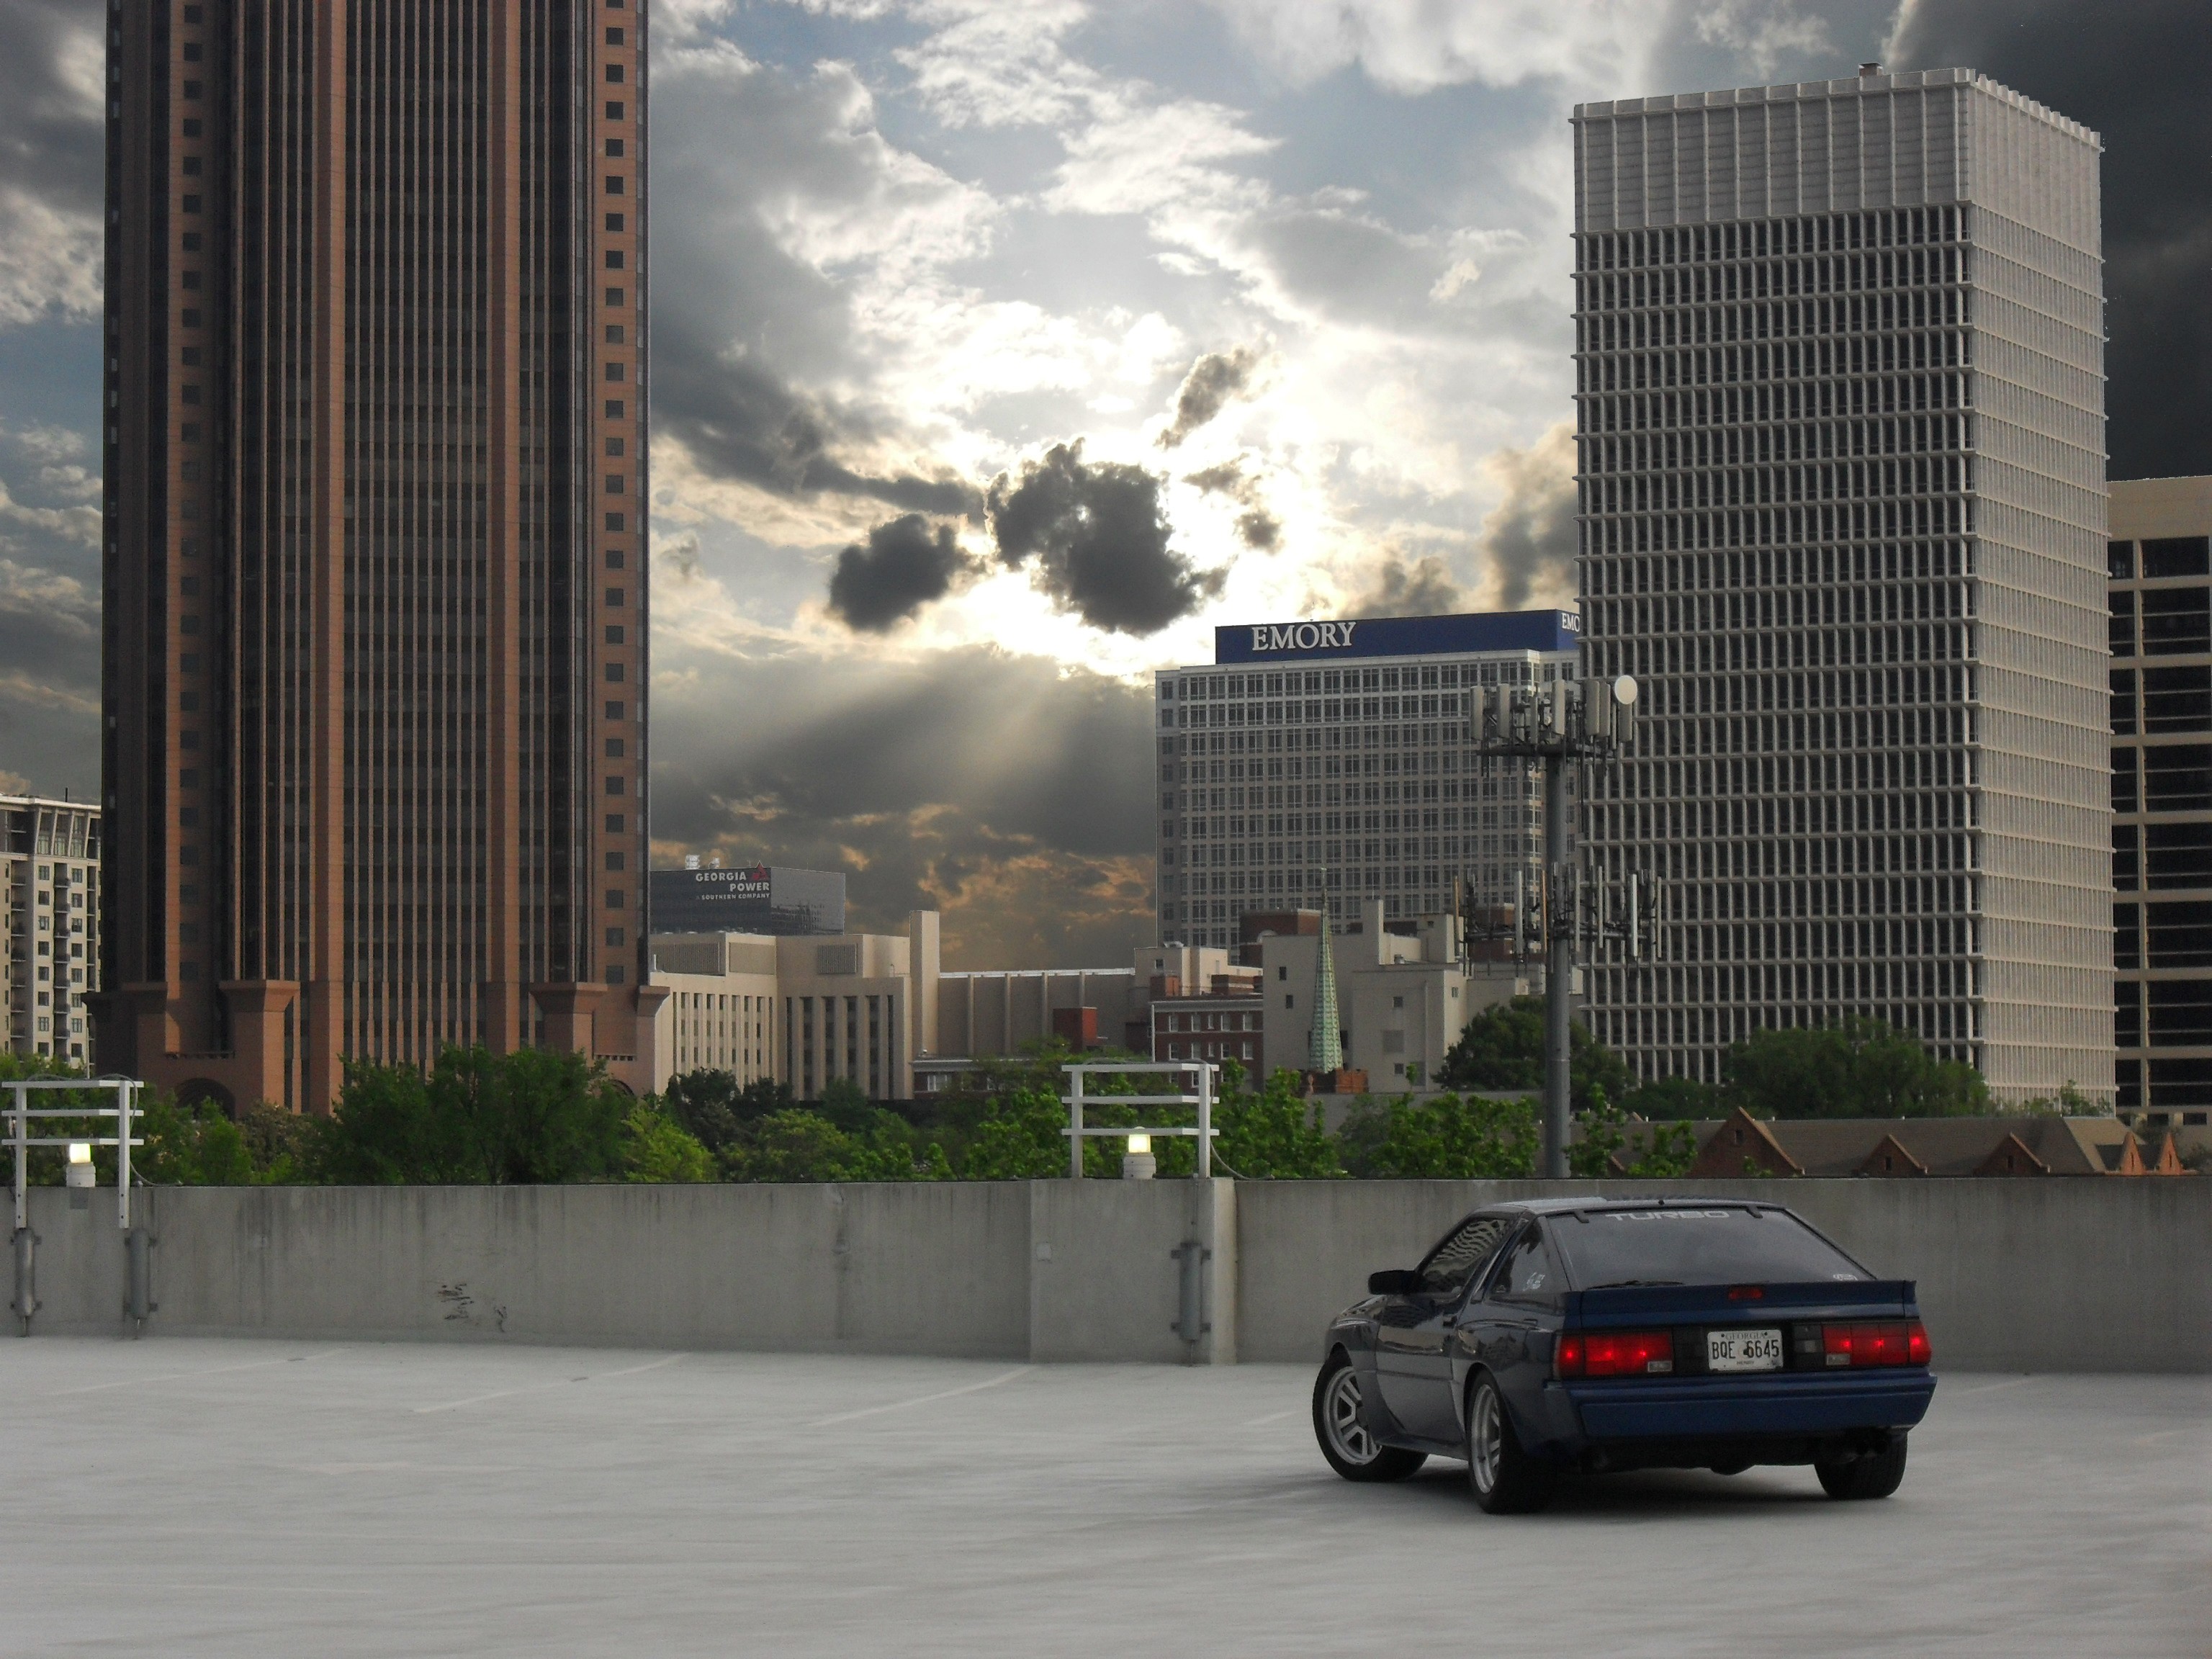 General 3072x2304 Mitsubishi cityscape blue cars mitsubishi starion Japanese cars building sky car vehicle sunlight clouds rear view licence plates trees taillights city skyscraper